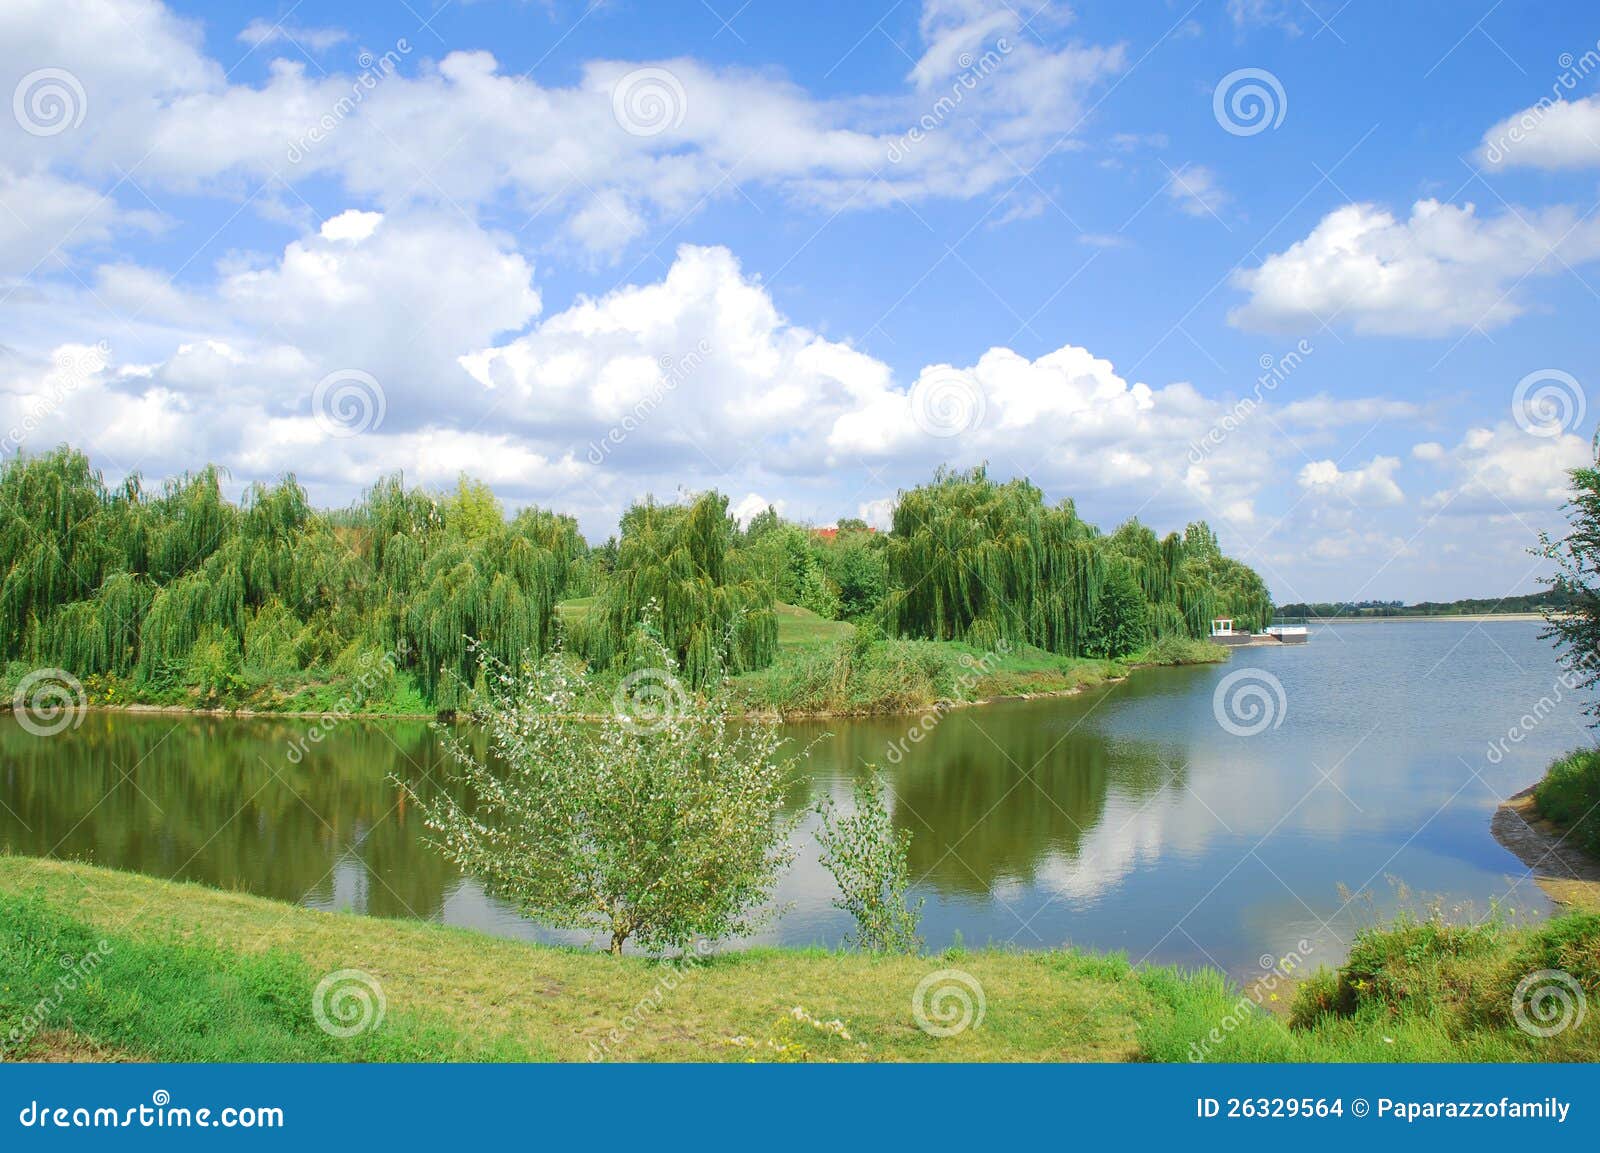 blue lake and sky with willows on the bank